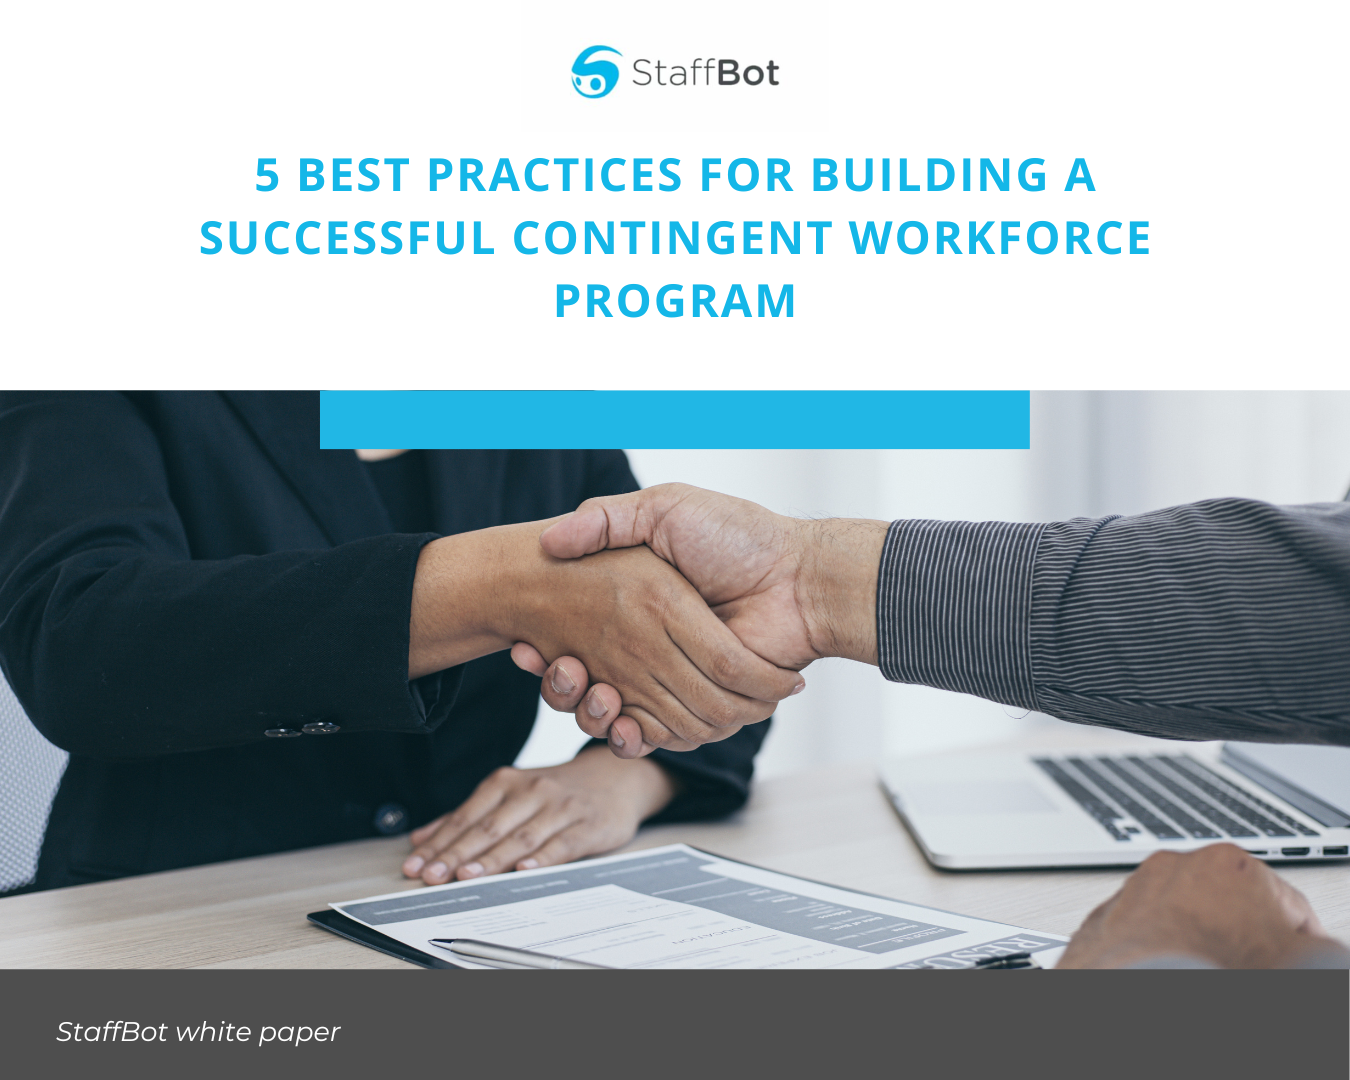 Best practices for contingent workforce programs image cover